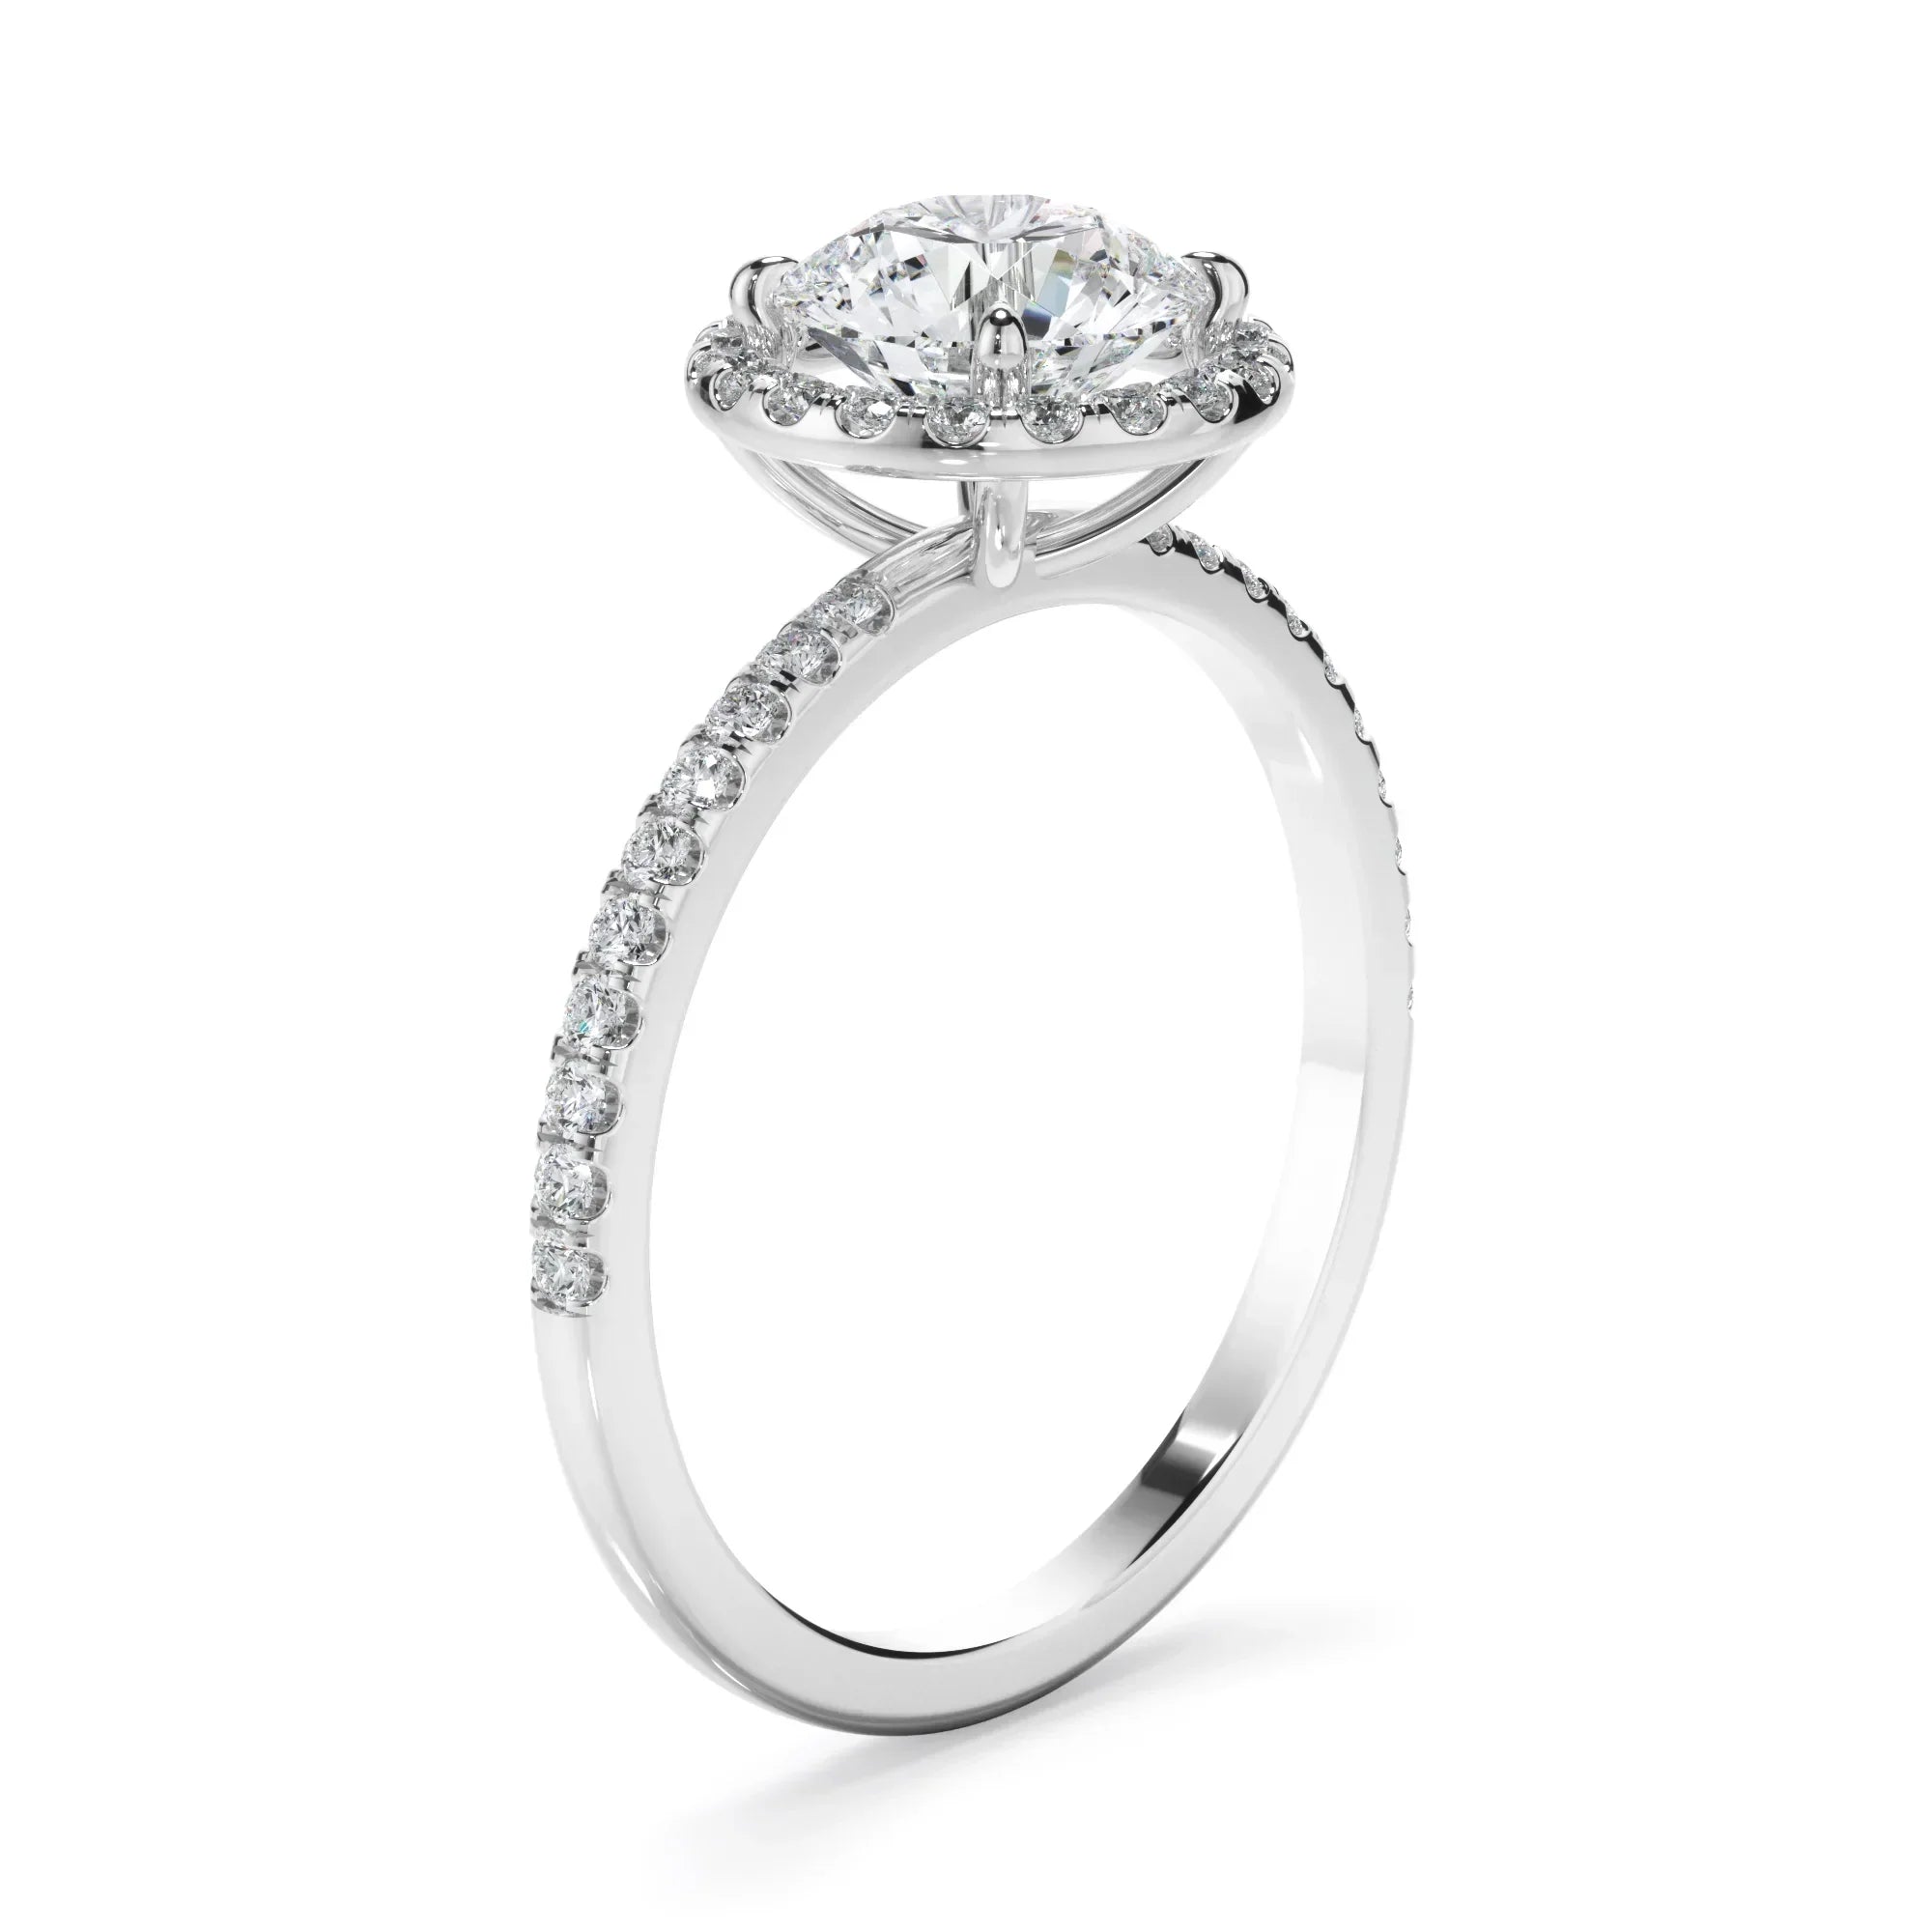 Round Brilliant Cut Diamond Halo Engagement Ring With Pave Band